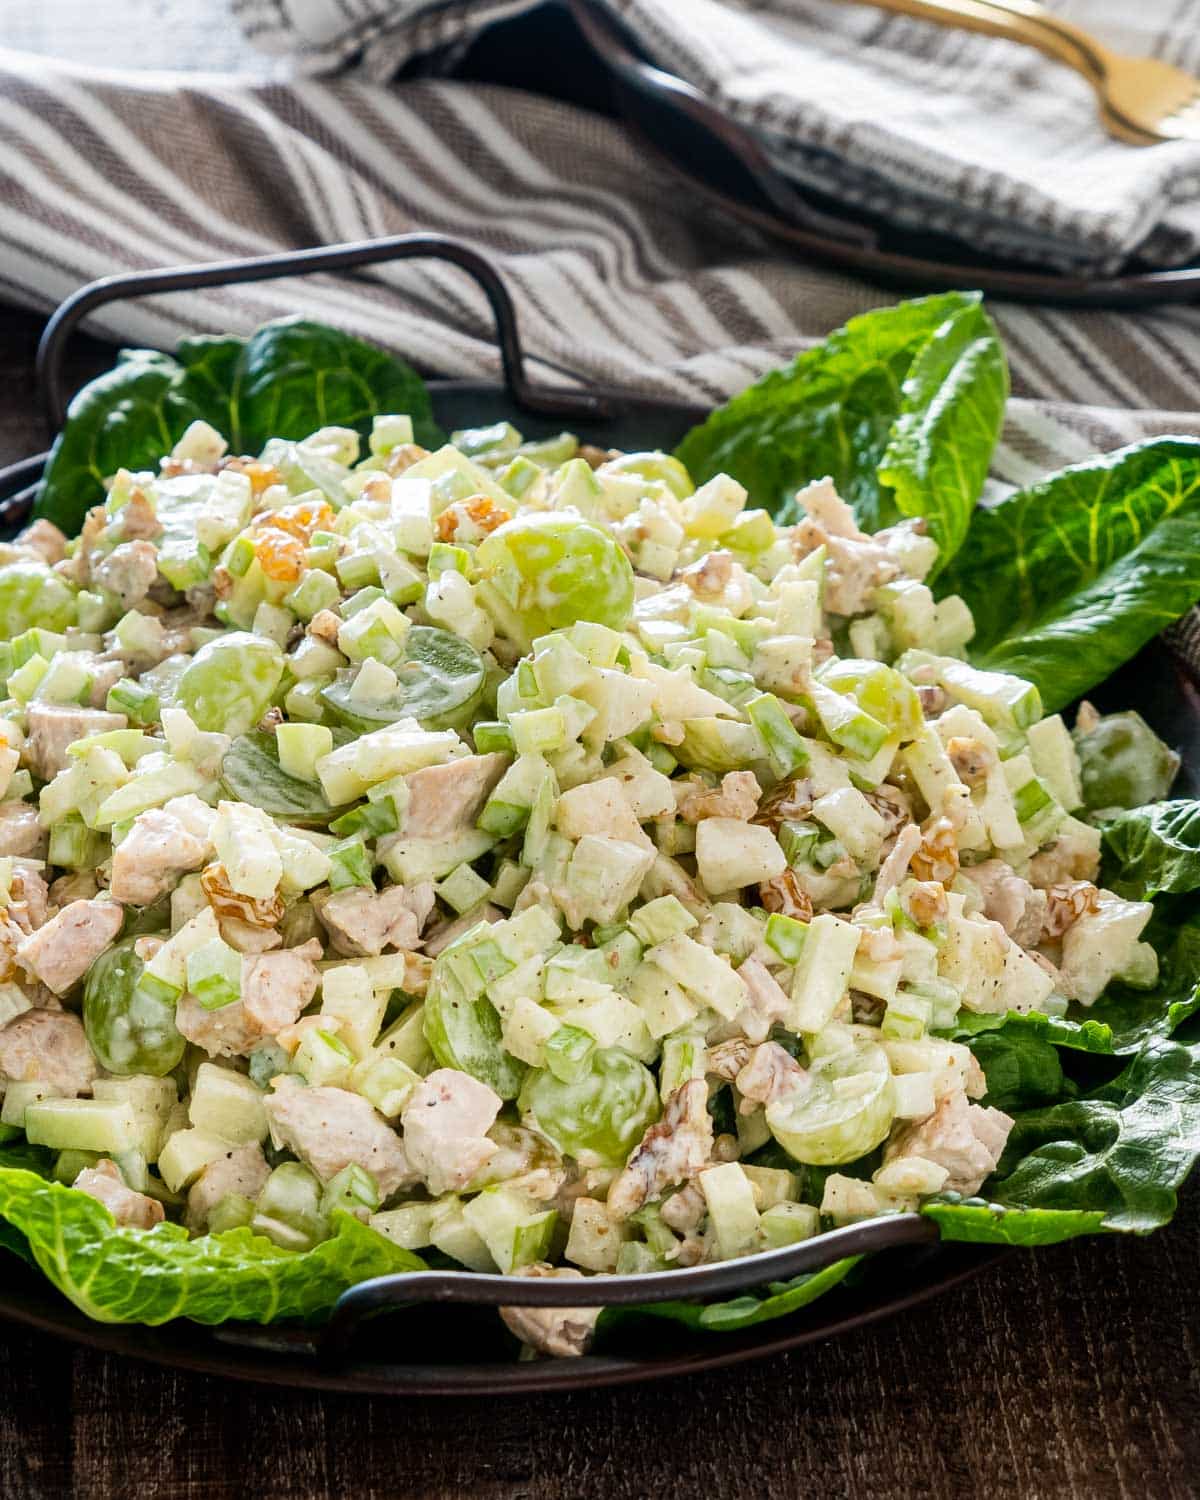 freshly made waldorf salad on a bed of lettuce.